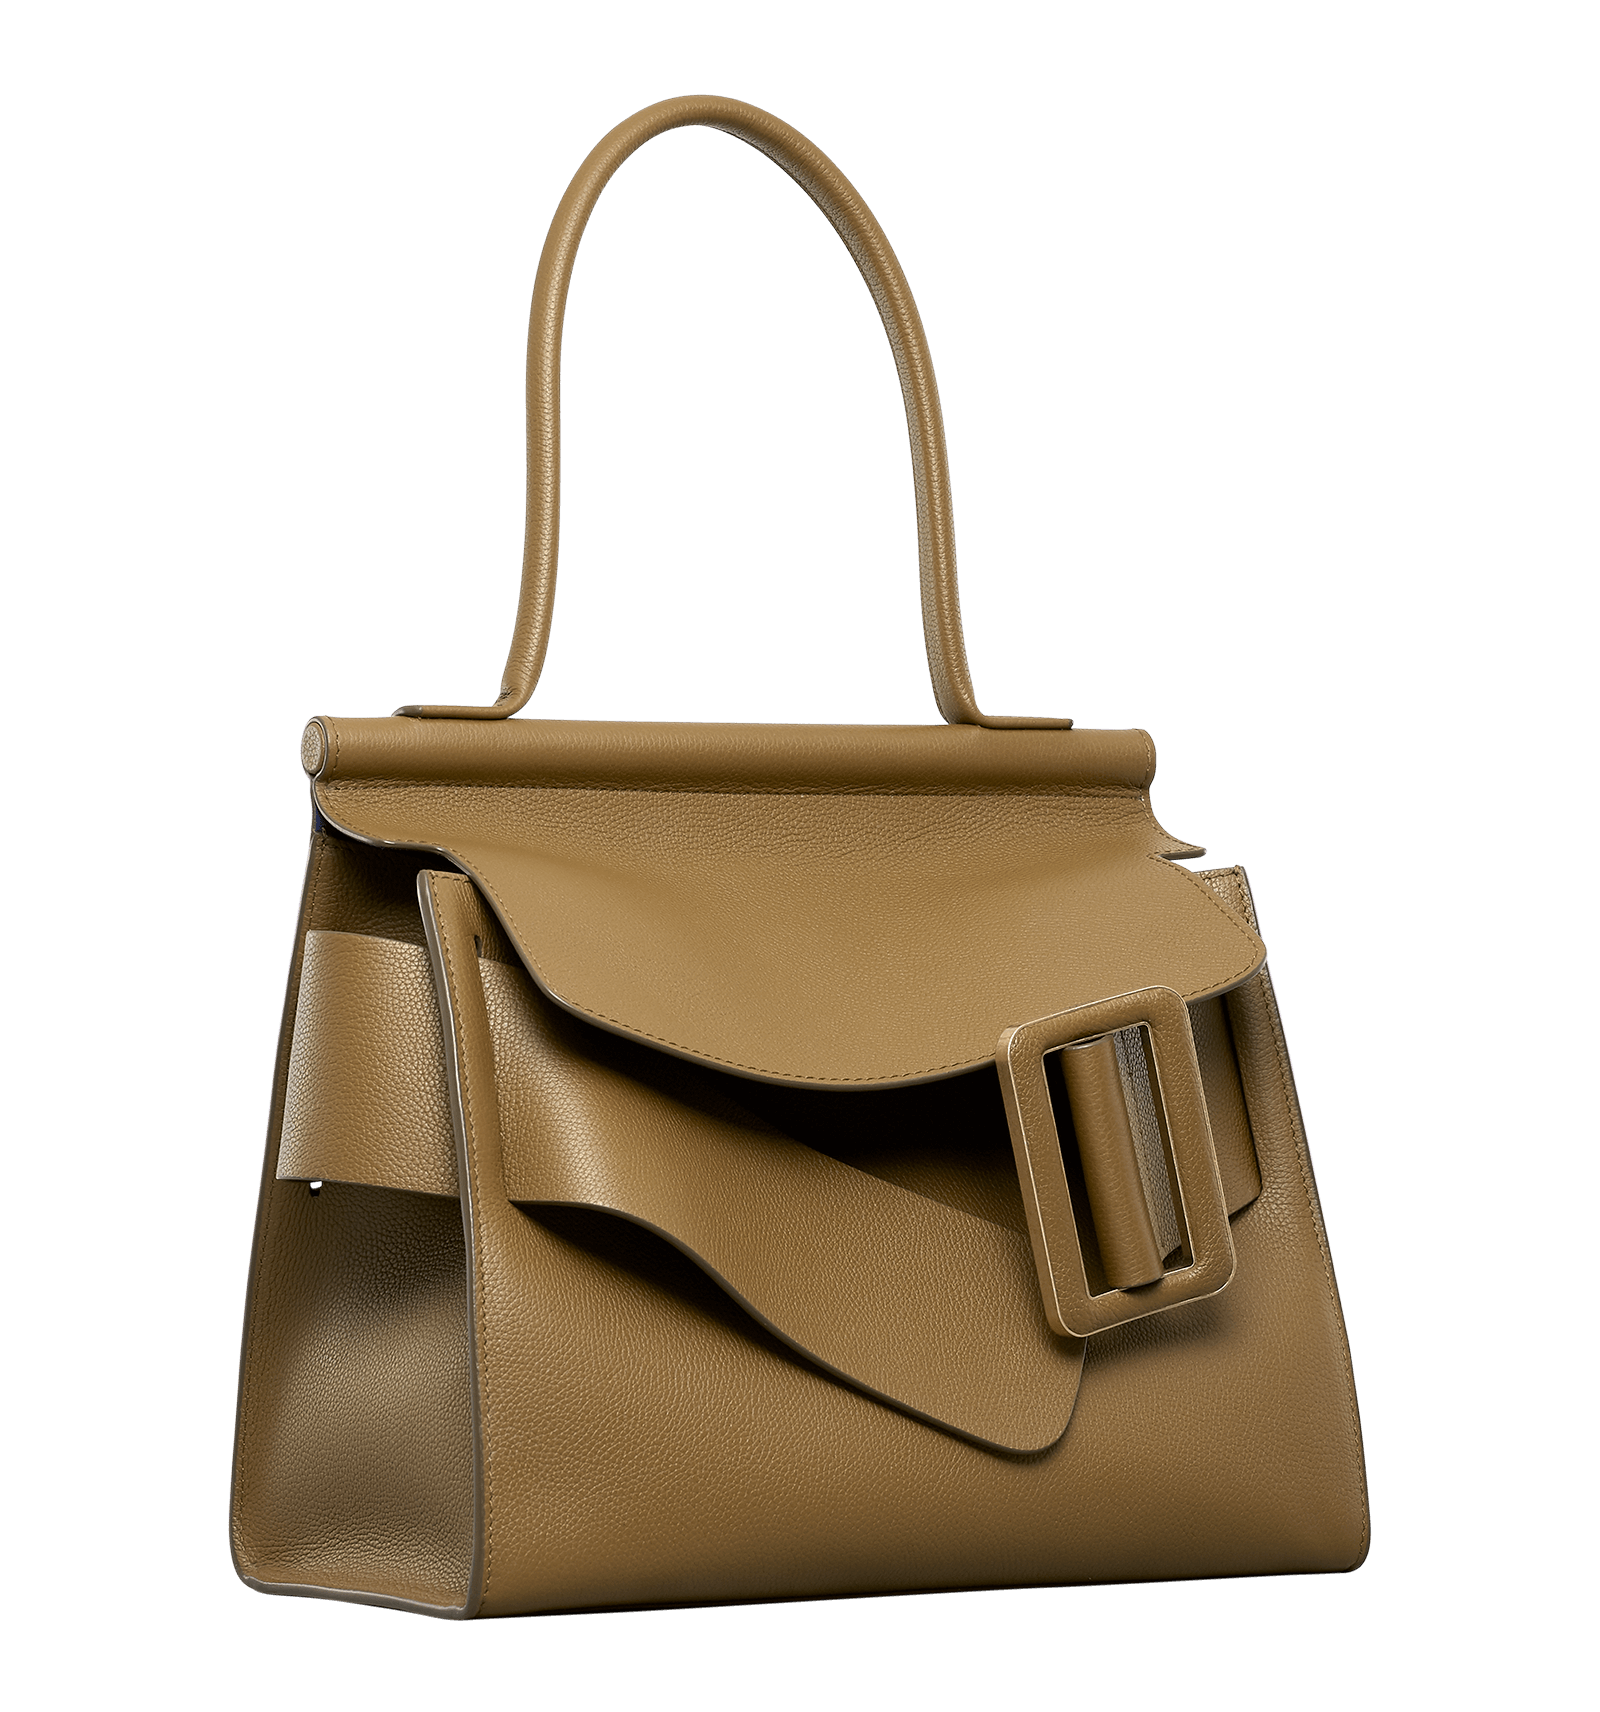 Brown, soft leather handbag with an unfastened, oversized buckle on the front, front flap closure and a single handle.